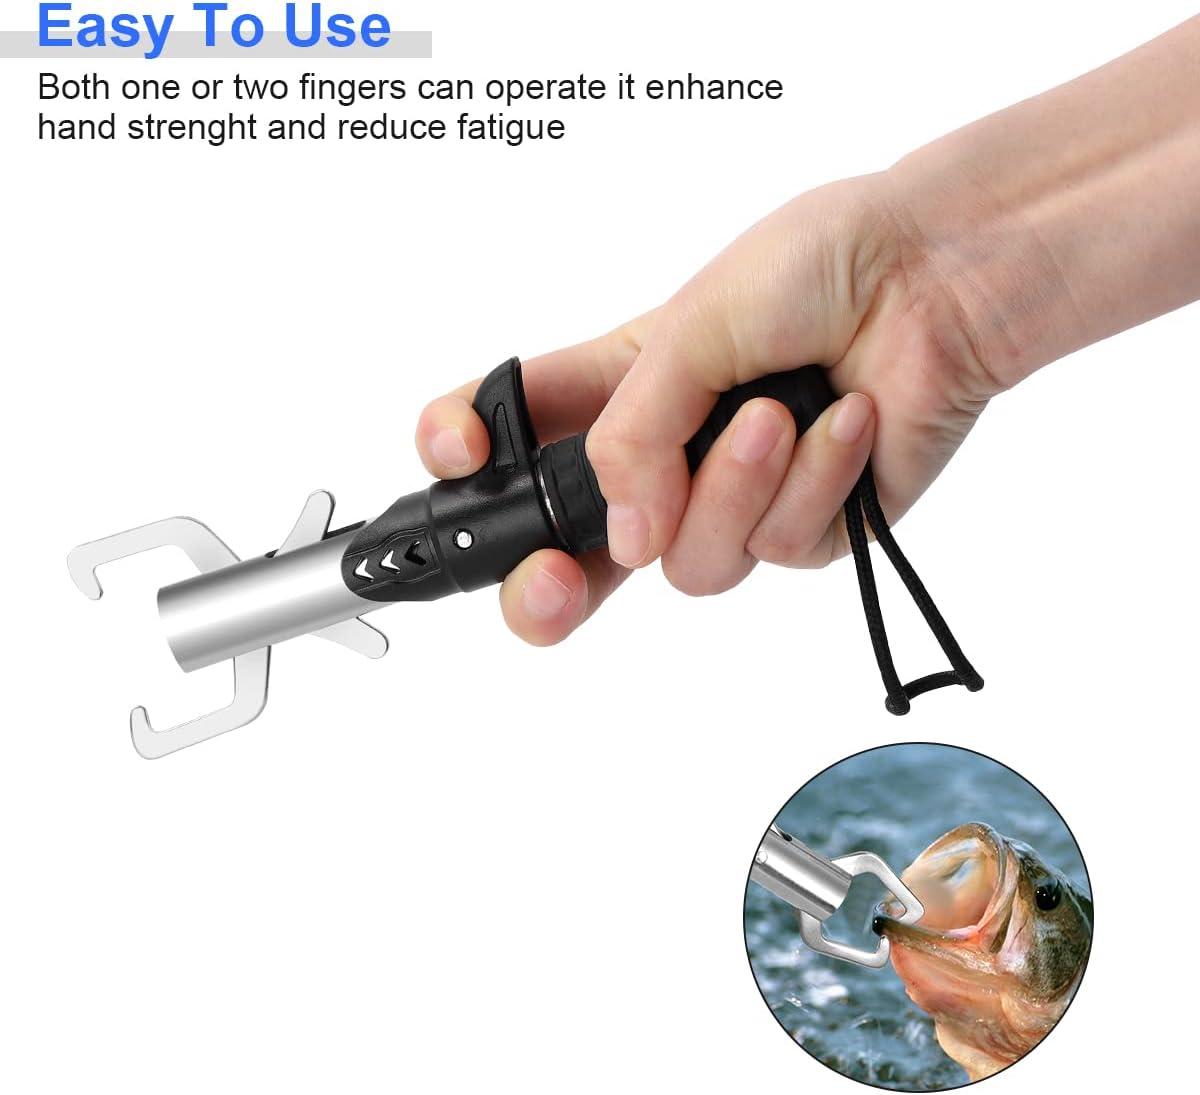 Multifunctional Fishing Tools Set, Fishing Pliers, Fish Hook Remover, Fish  Lip Gripper, Handheld Digital Fishing Scale (Not Included Battery), Fishing  Gear, Fishing Gifts for Men for Father's Day fishing tools-Black